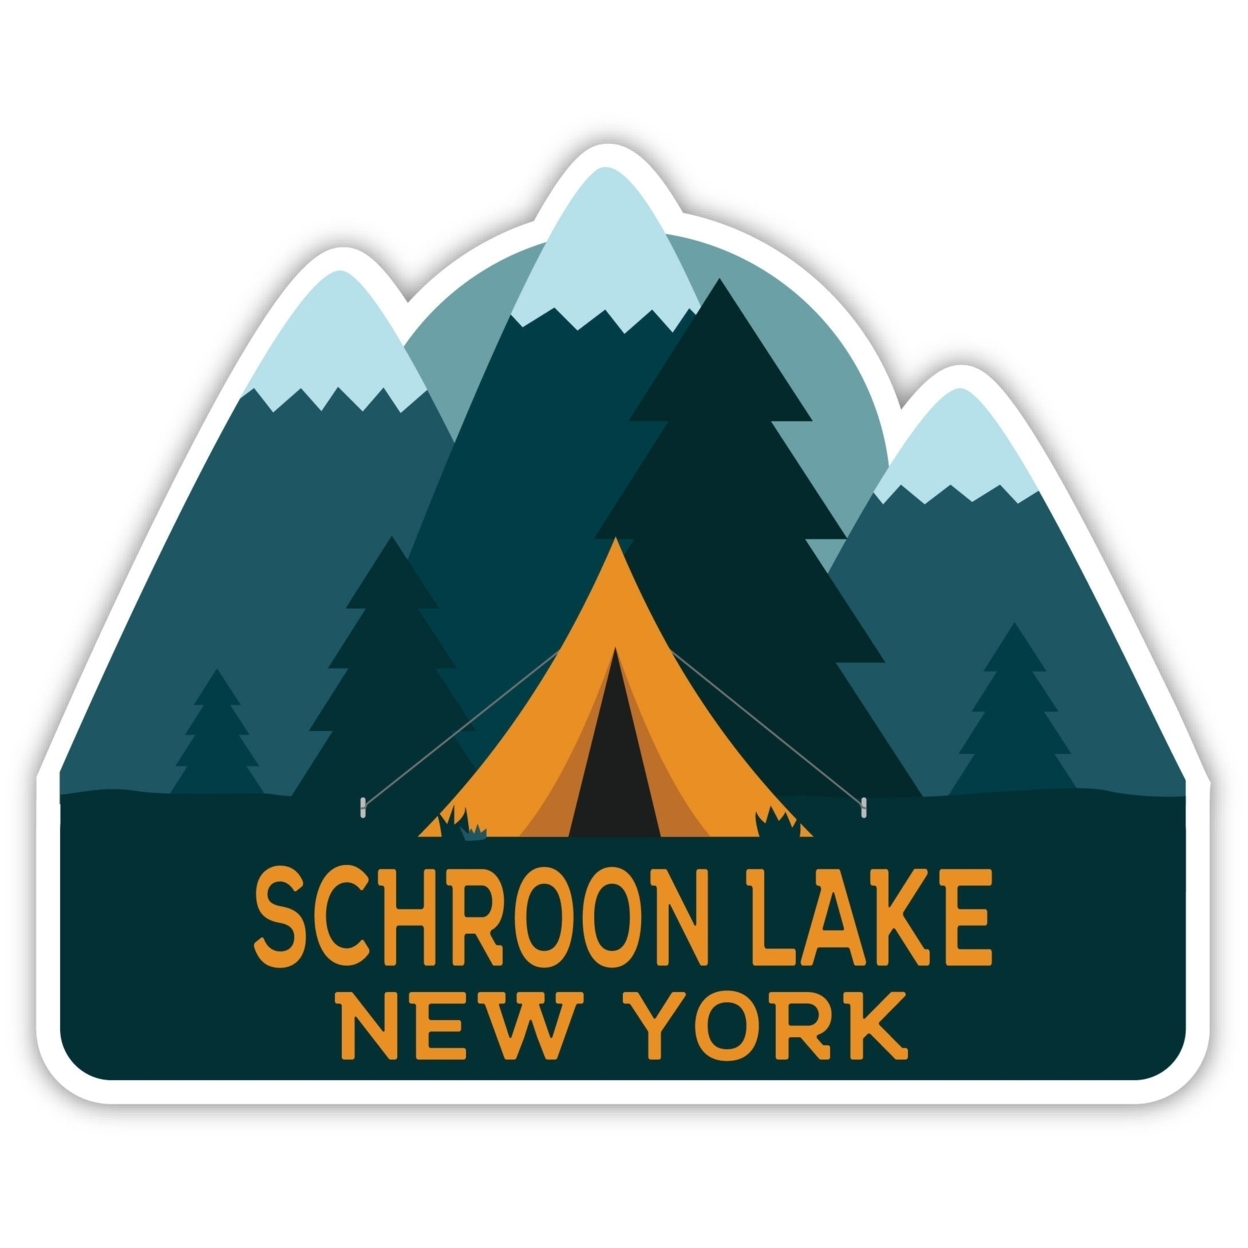 Schroon Lake New York Souvenir Decorative Stickers (Choose Theme And Size) - Single Unit, 4-Inch, Tent